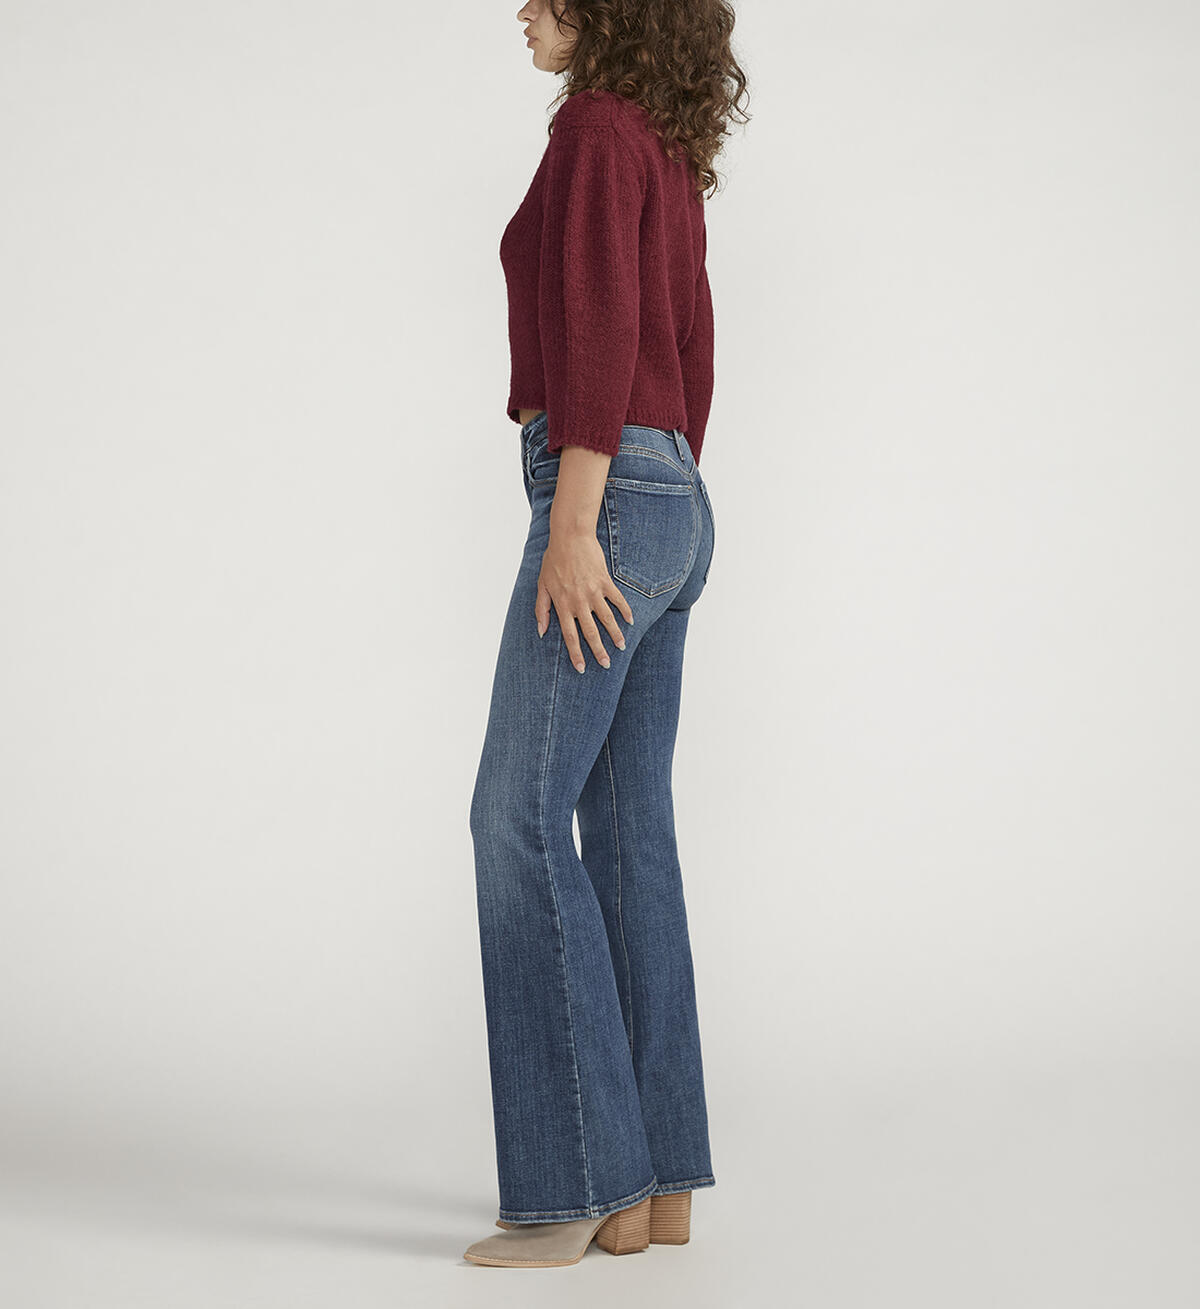 Most Wanted Mid Rise Flare Jeans, , hi-res image number 2